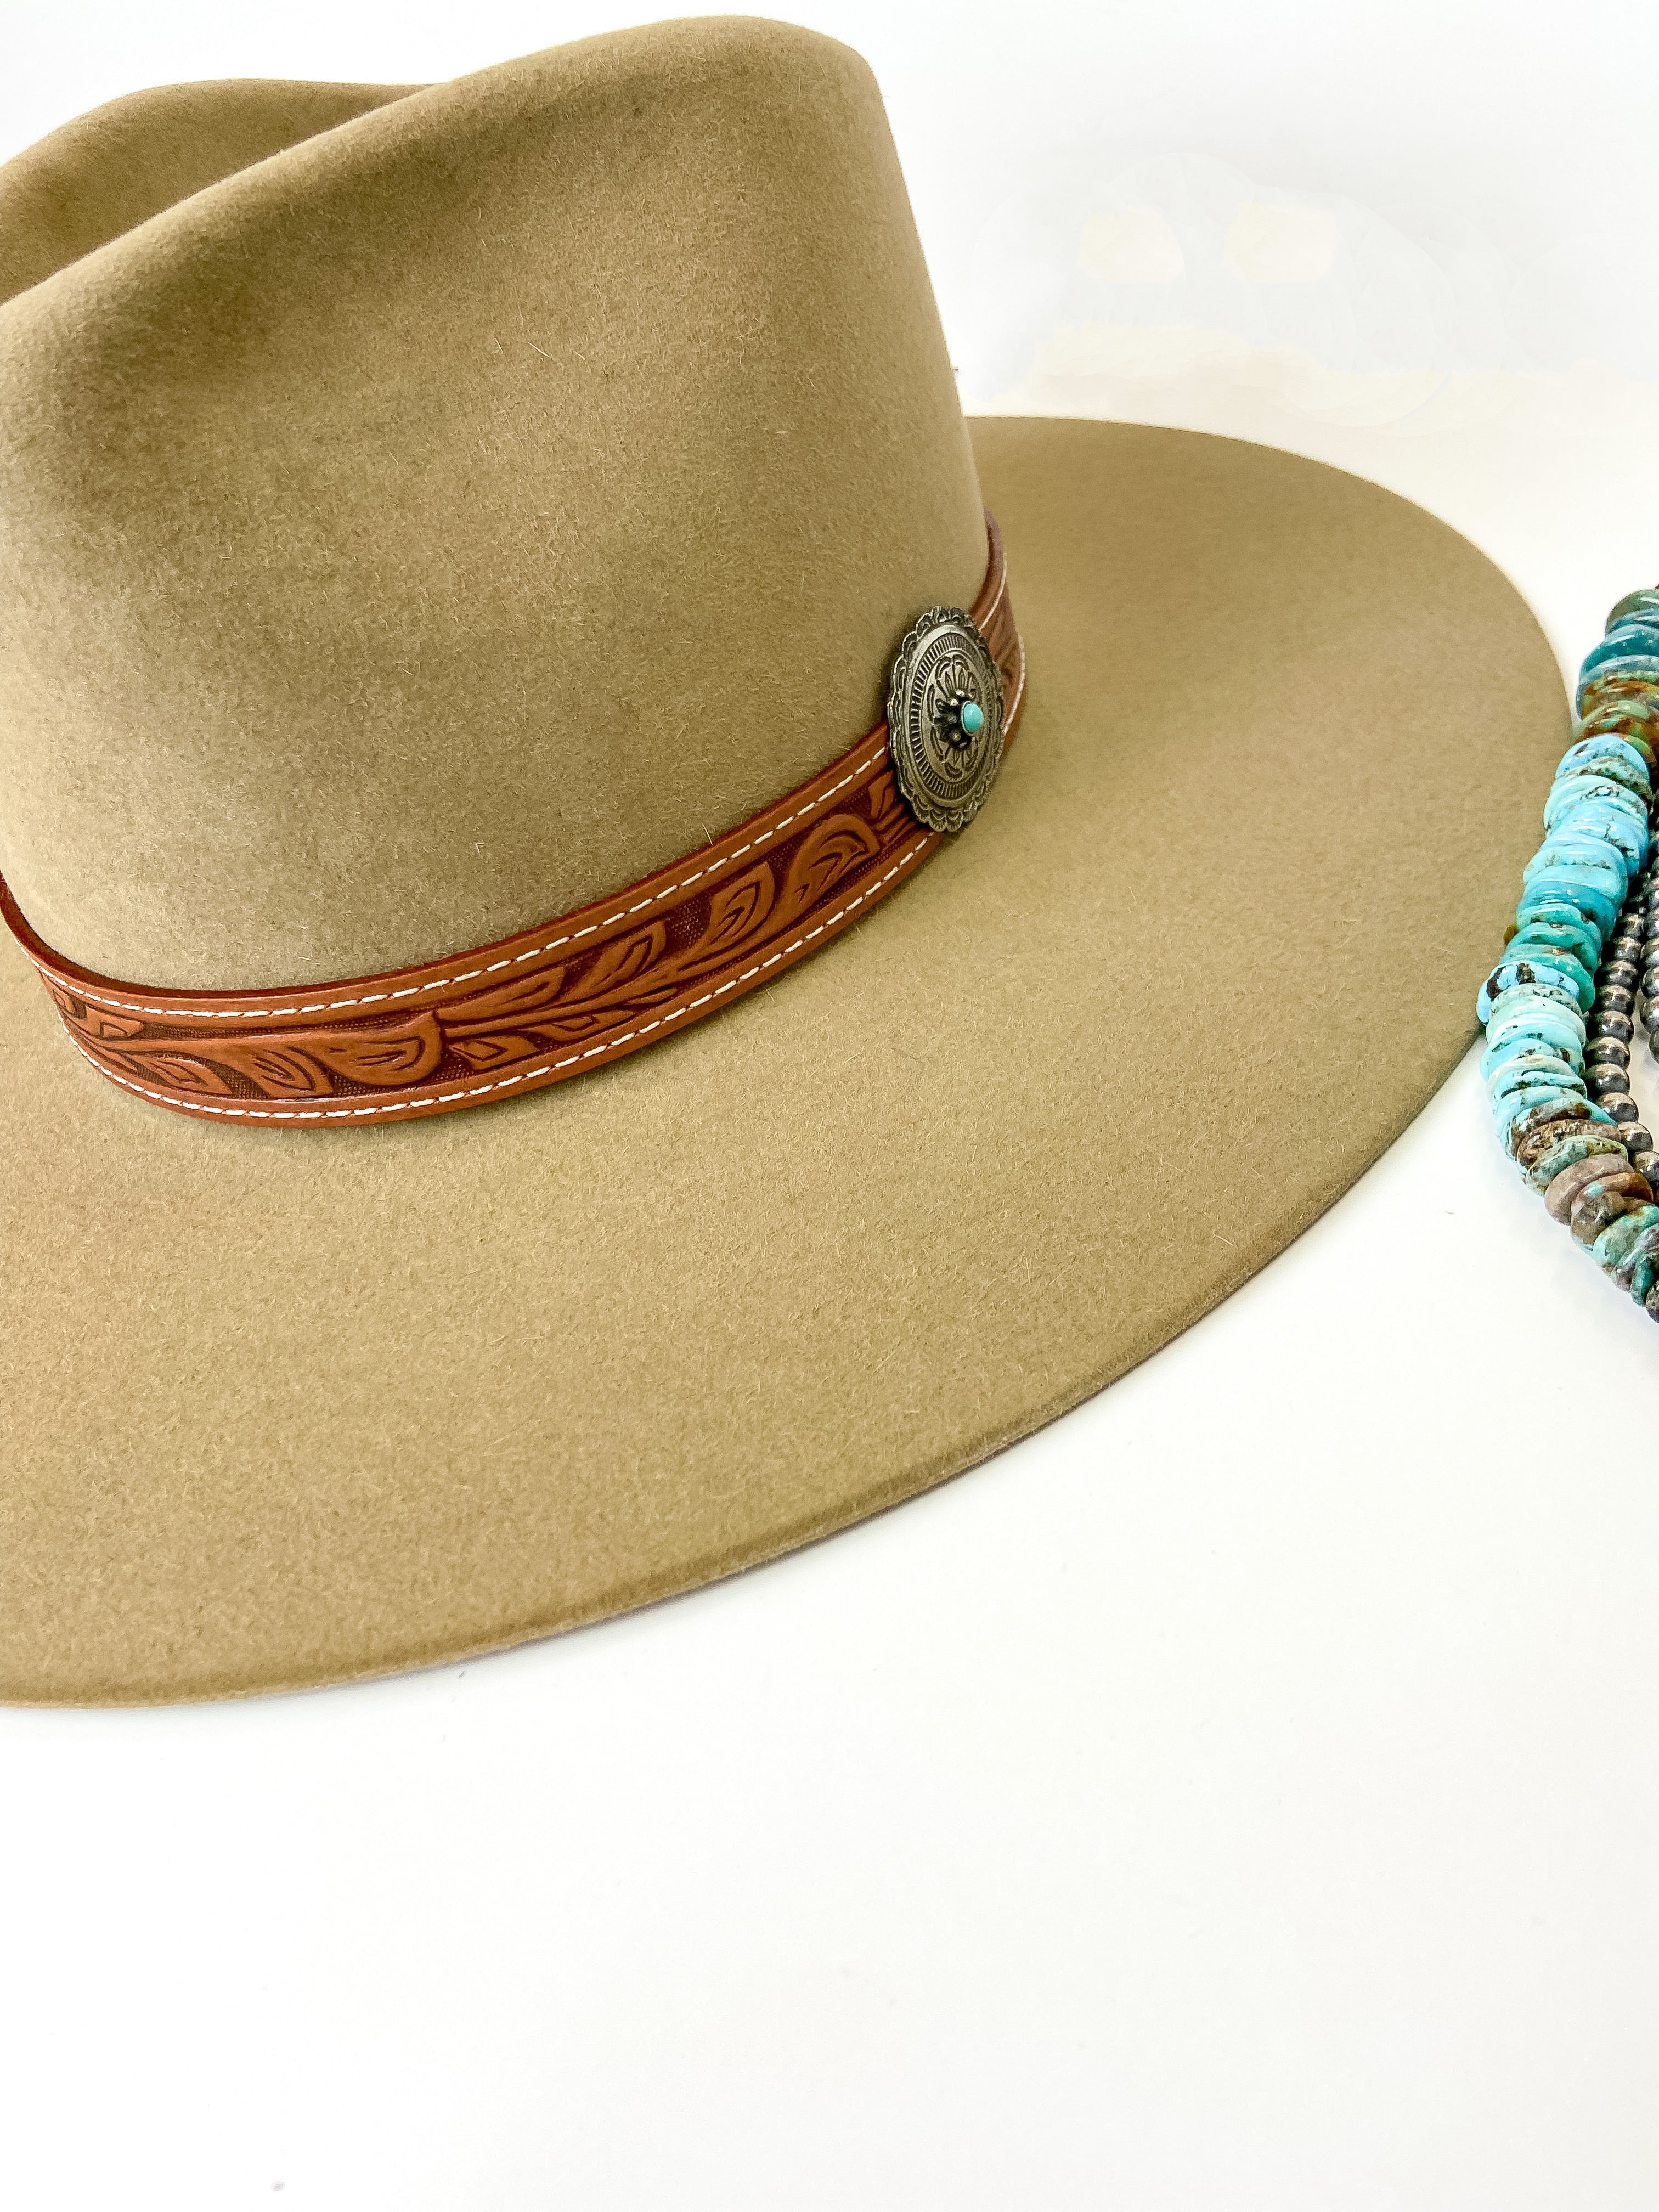 Charlie 1 Horse | Lori Wool Felt Hat with Leather Tooled Band and Silver Concho in Fawn Brown - Giddy Up Glamour Boutique